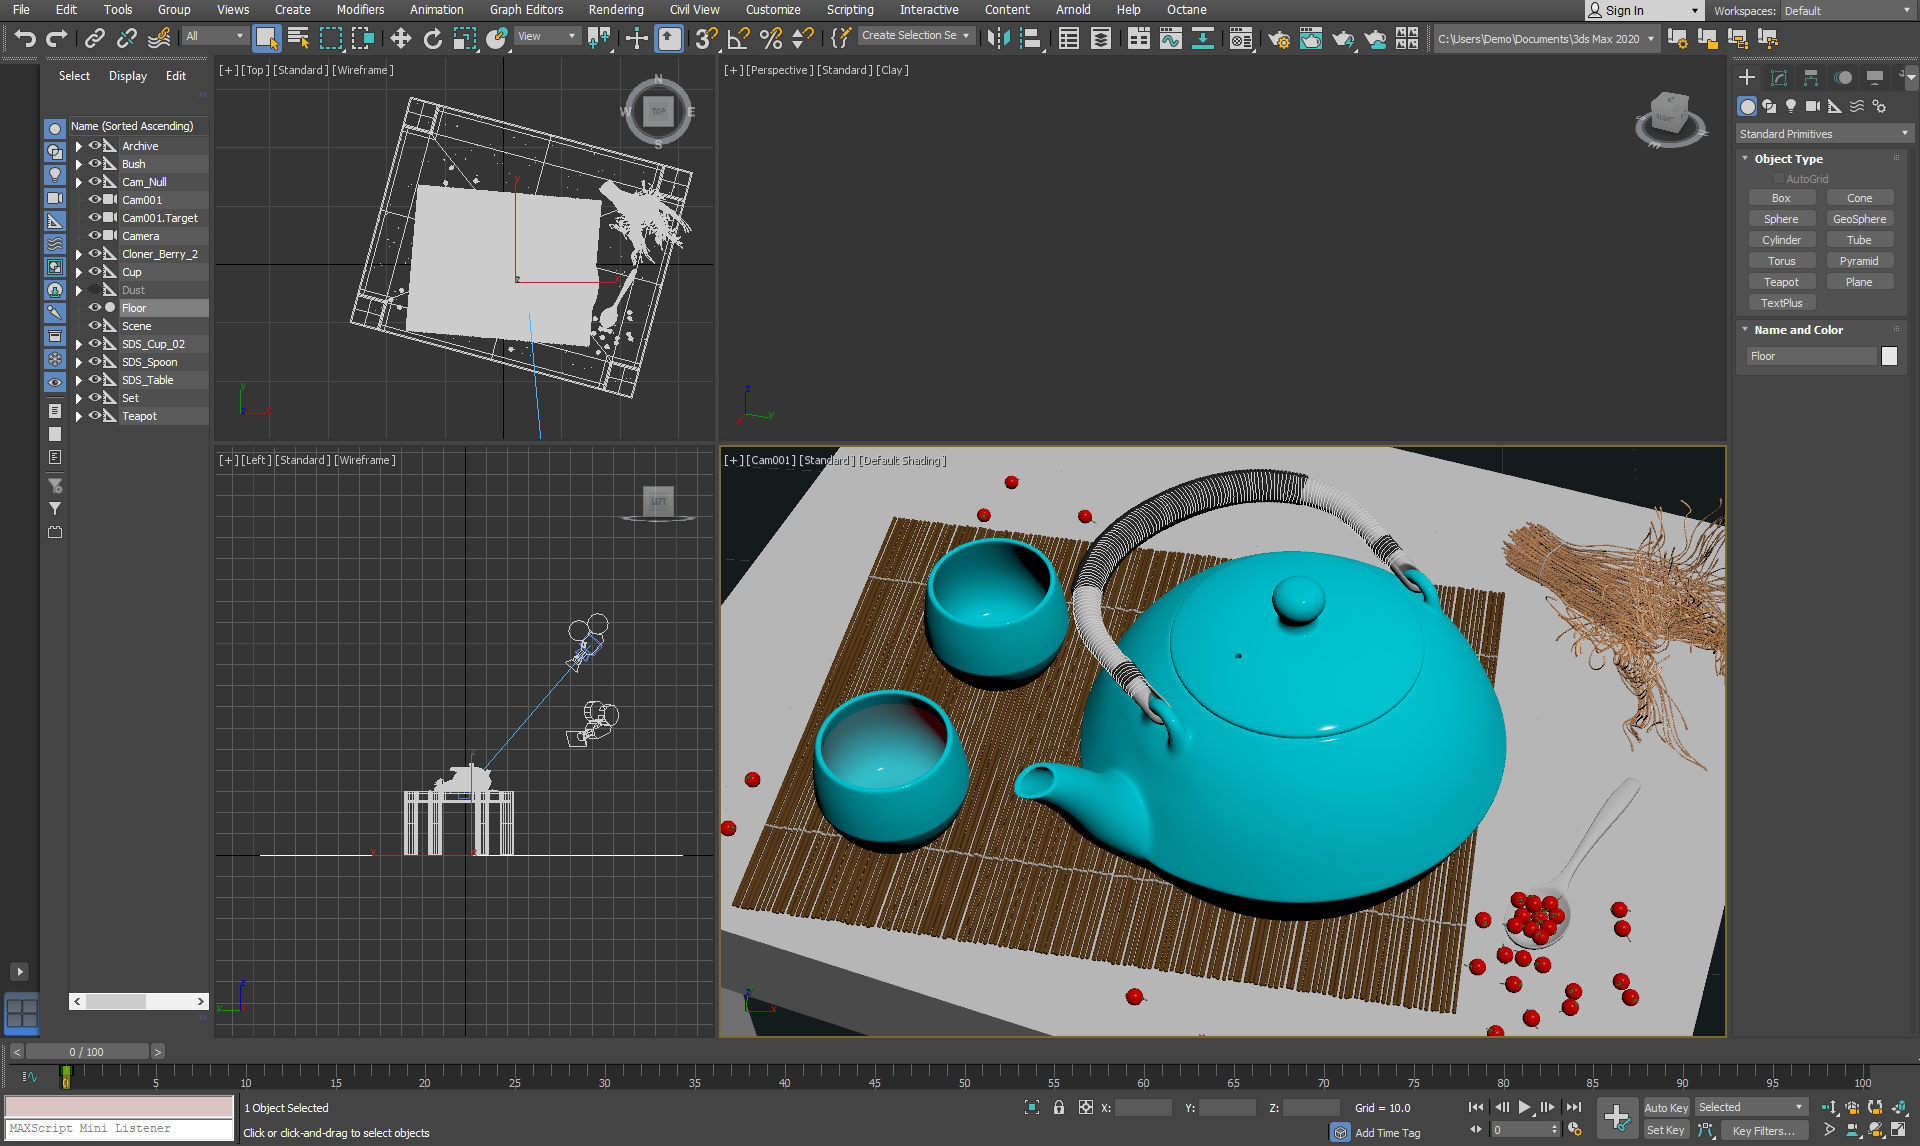 Figure 1: 3ds Max on startup after loading a project